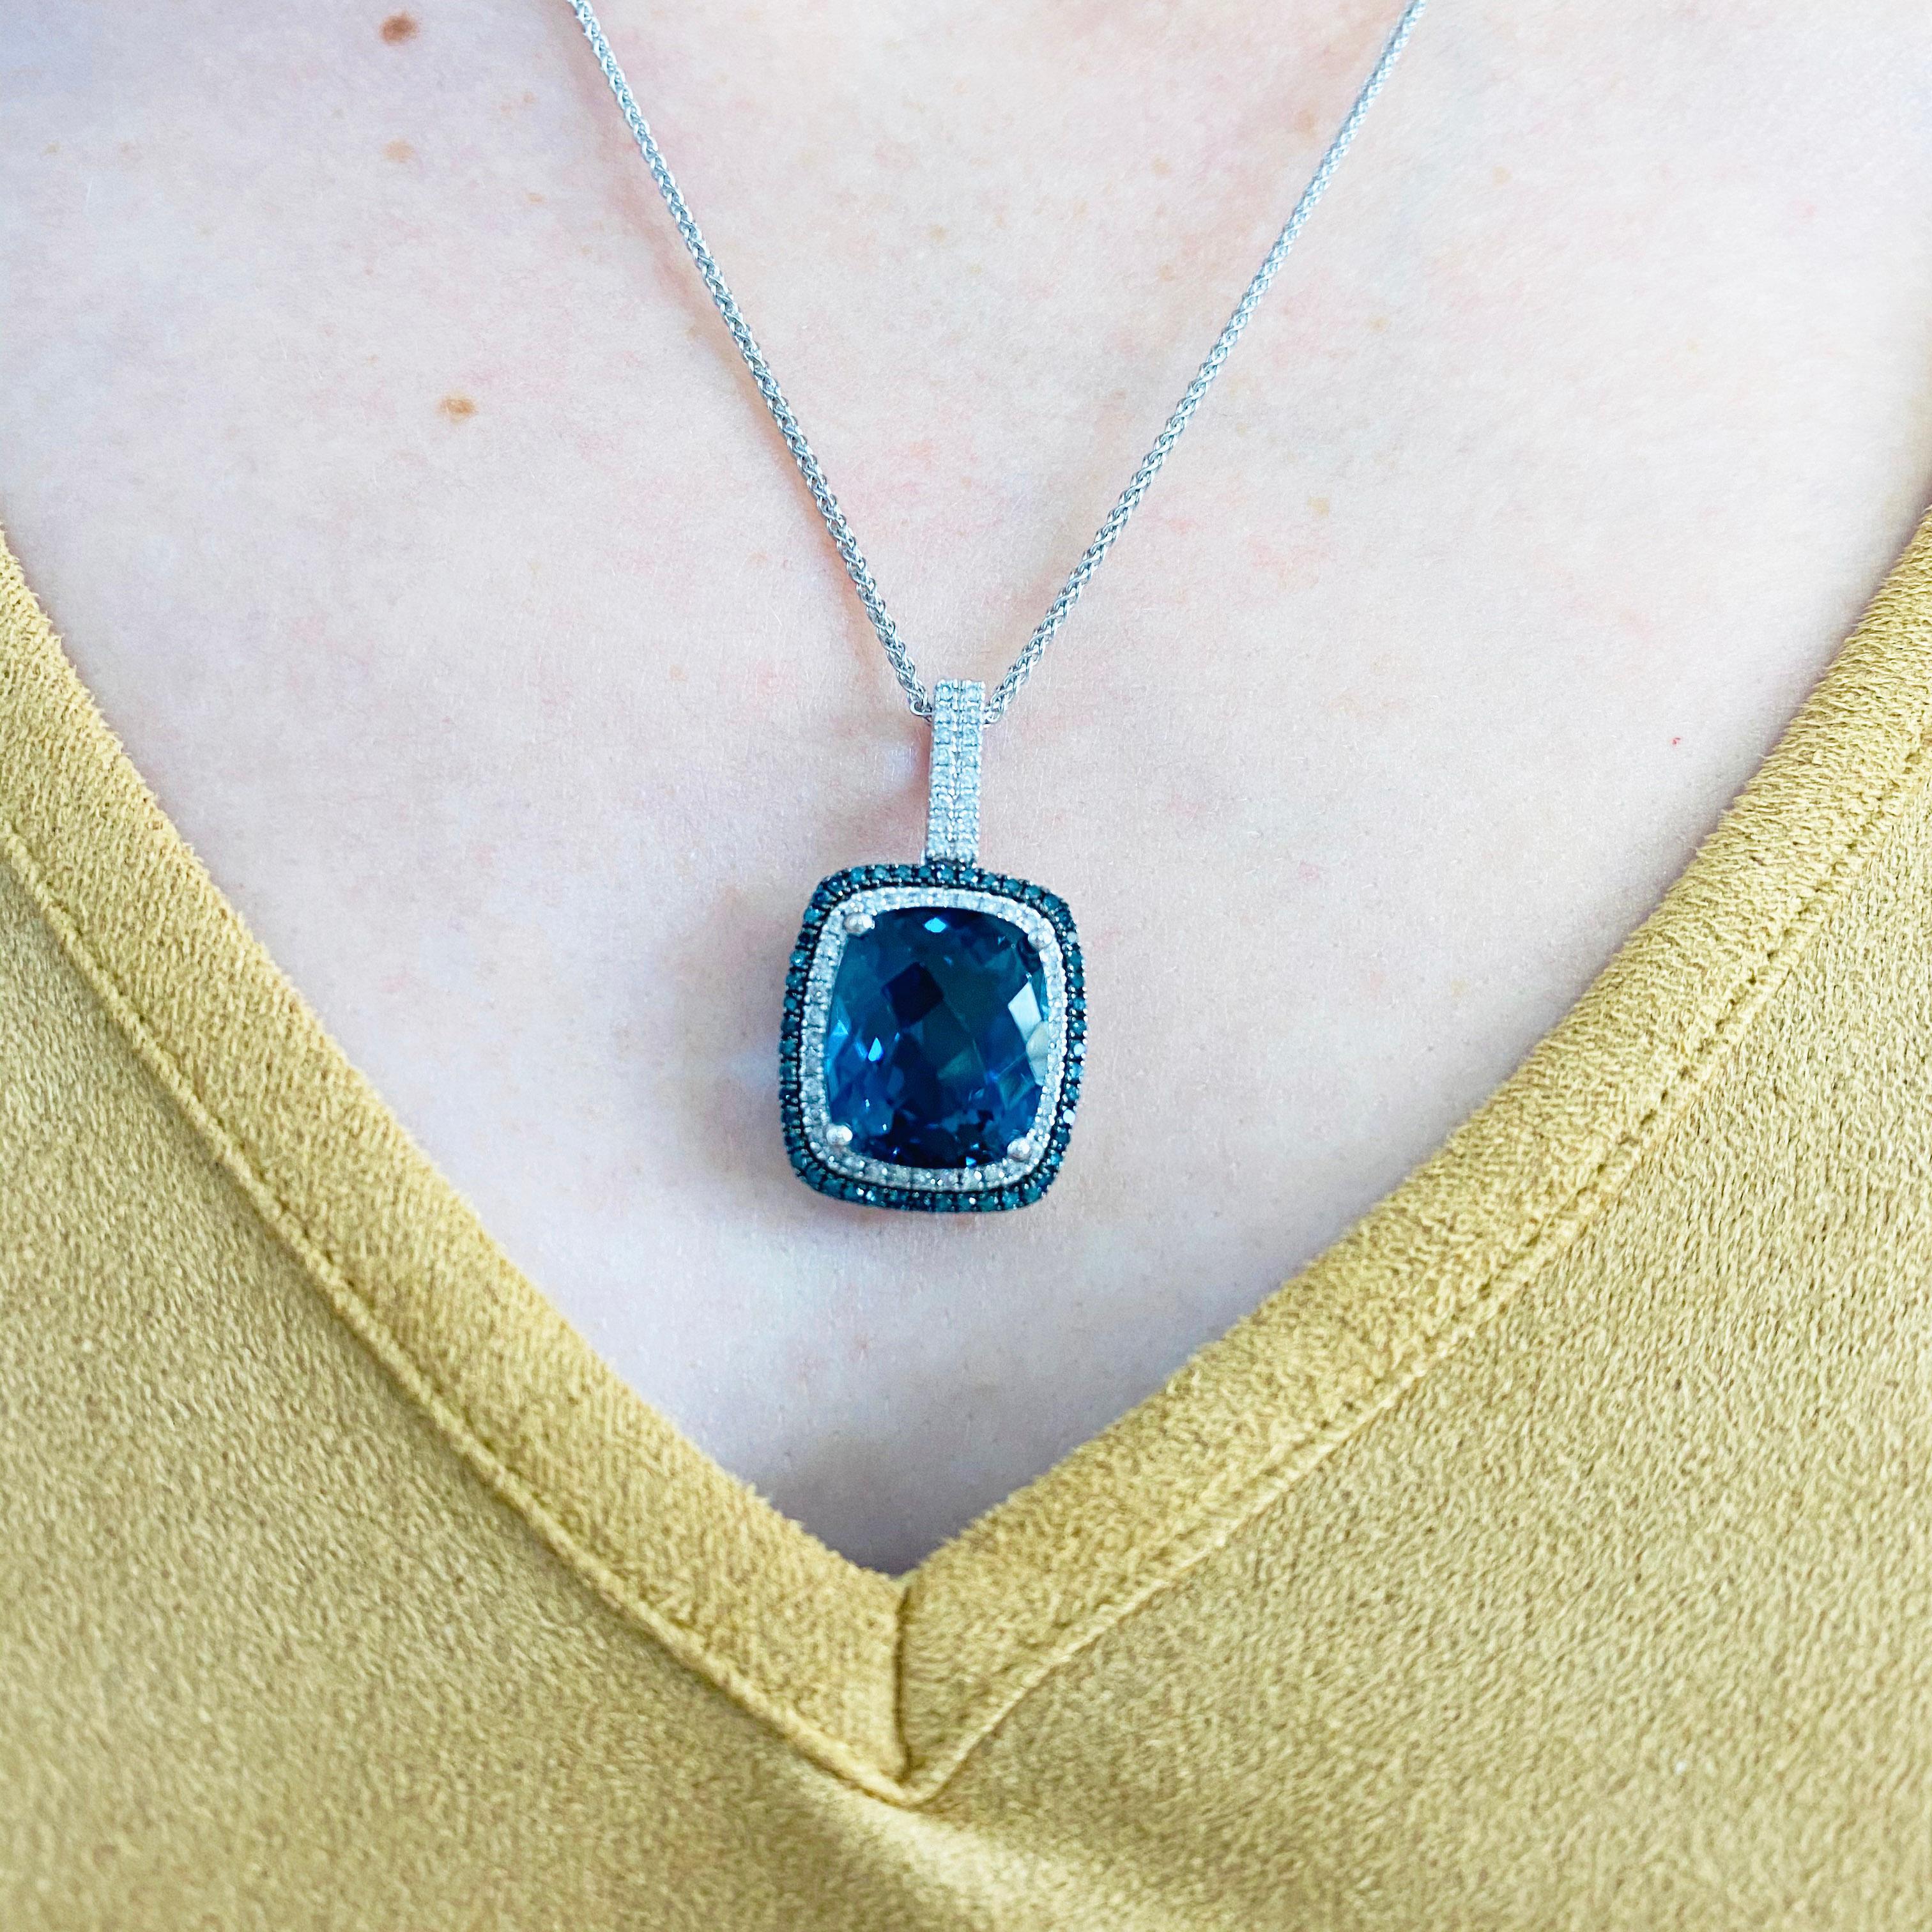 This royal blue colored  London blue topaz is set in polished 14k white gold and dripping with diamonds provides a look that is very modern yet classic! There are white diamonds around and blue diamonds around the white diamonds.  This necklace is